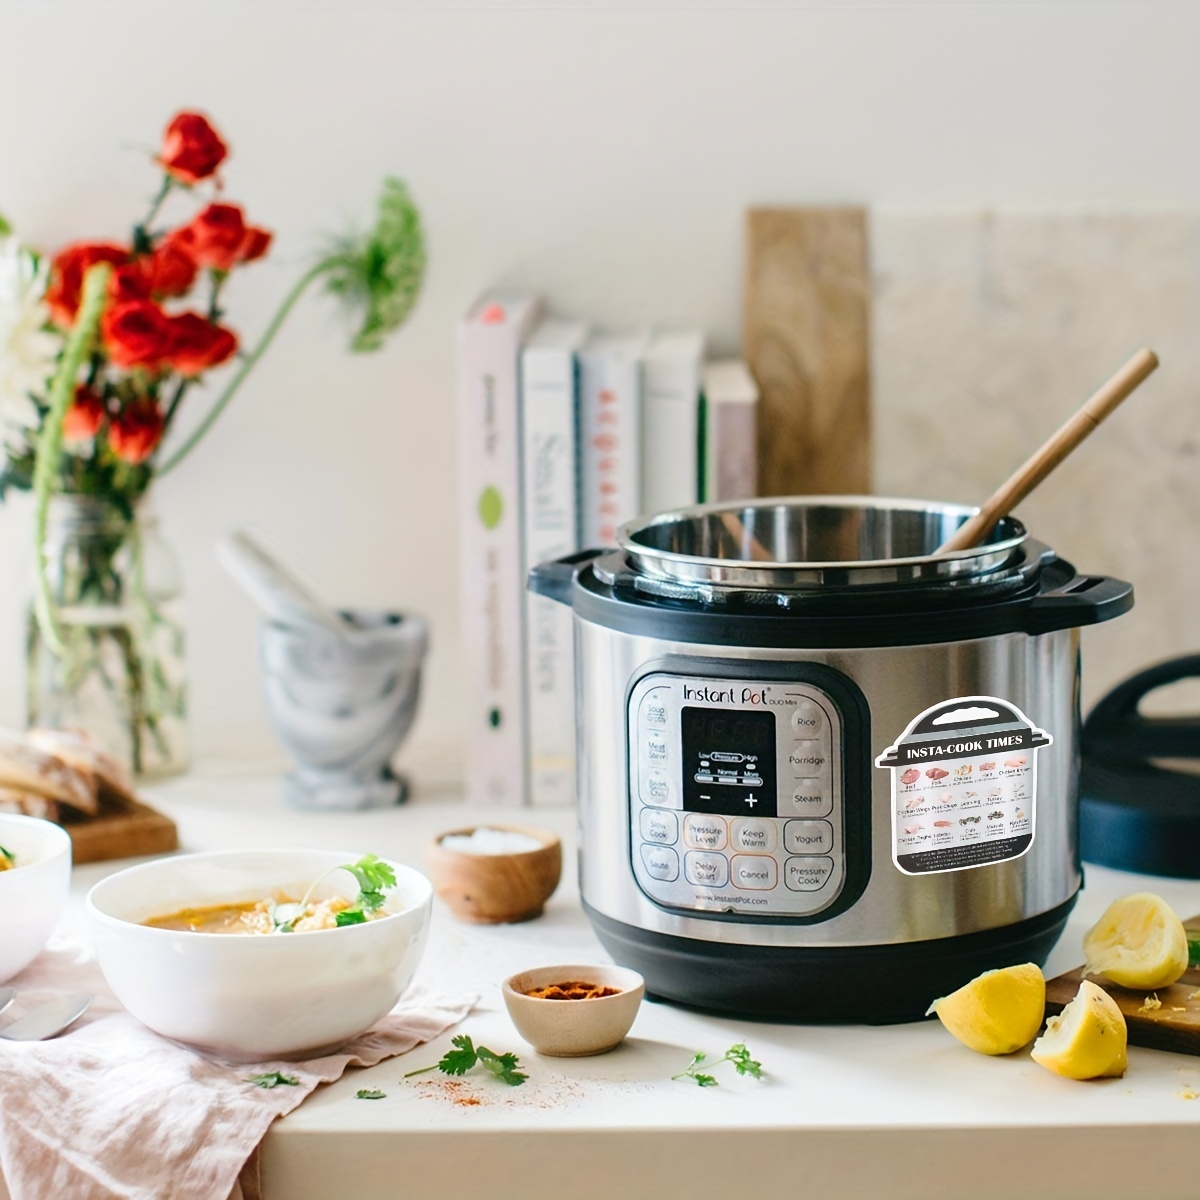 This Magnetic Instant Pot Cheat Sheet Set Makes Cooking Easier